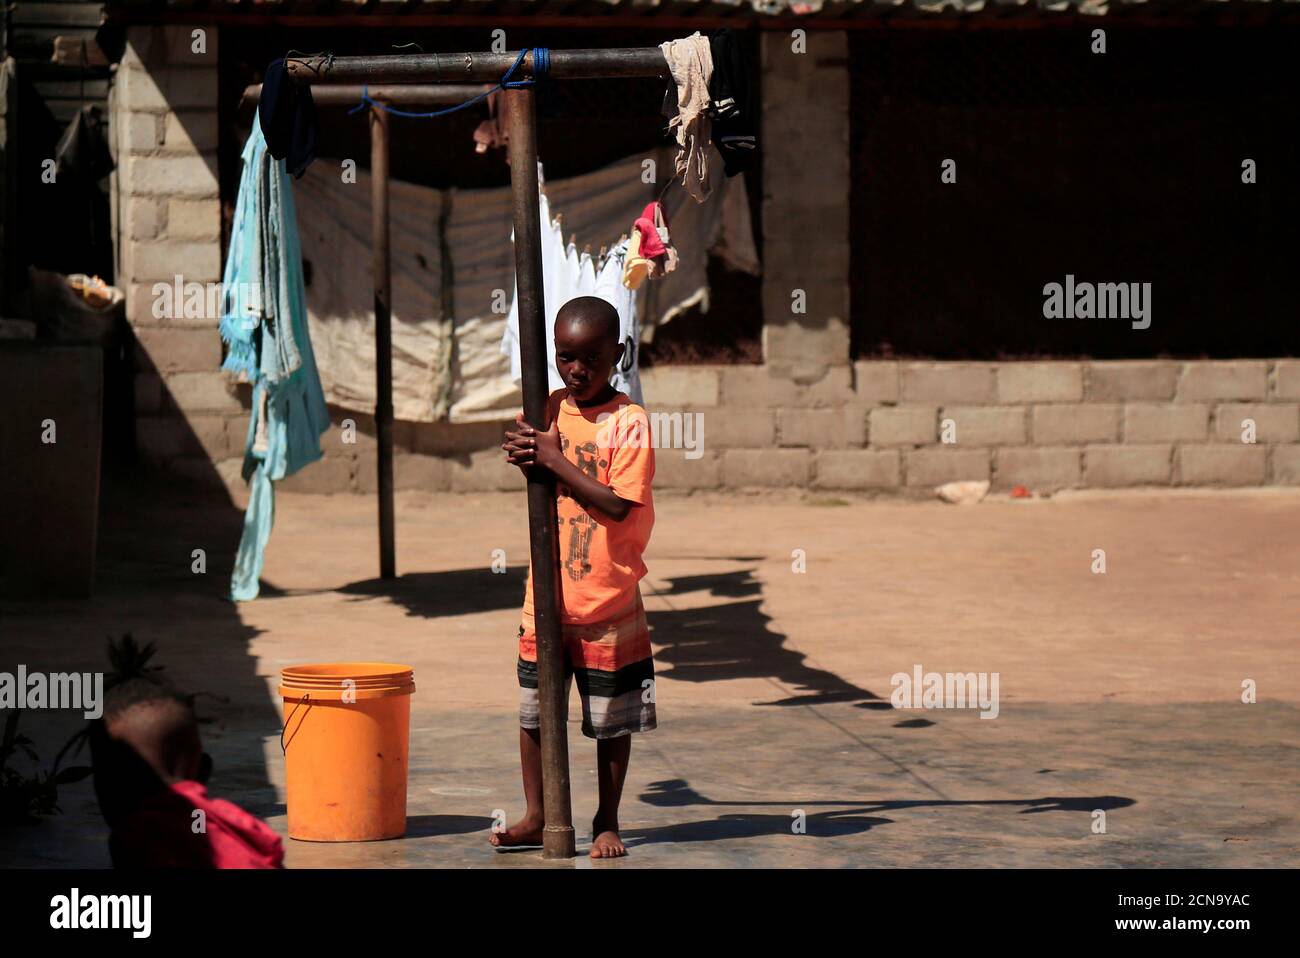 Densel Pamire plays outside his family's home during a nationwide lockdown to help curb the coronavirus disease (COVID-19) spread in Harare, Zimbabwe, May 9, 2020. Picture taken May 9, 2020. REUTERS/Philimon Bulawayo Stock Photo